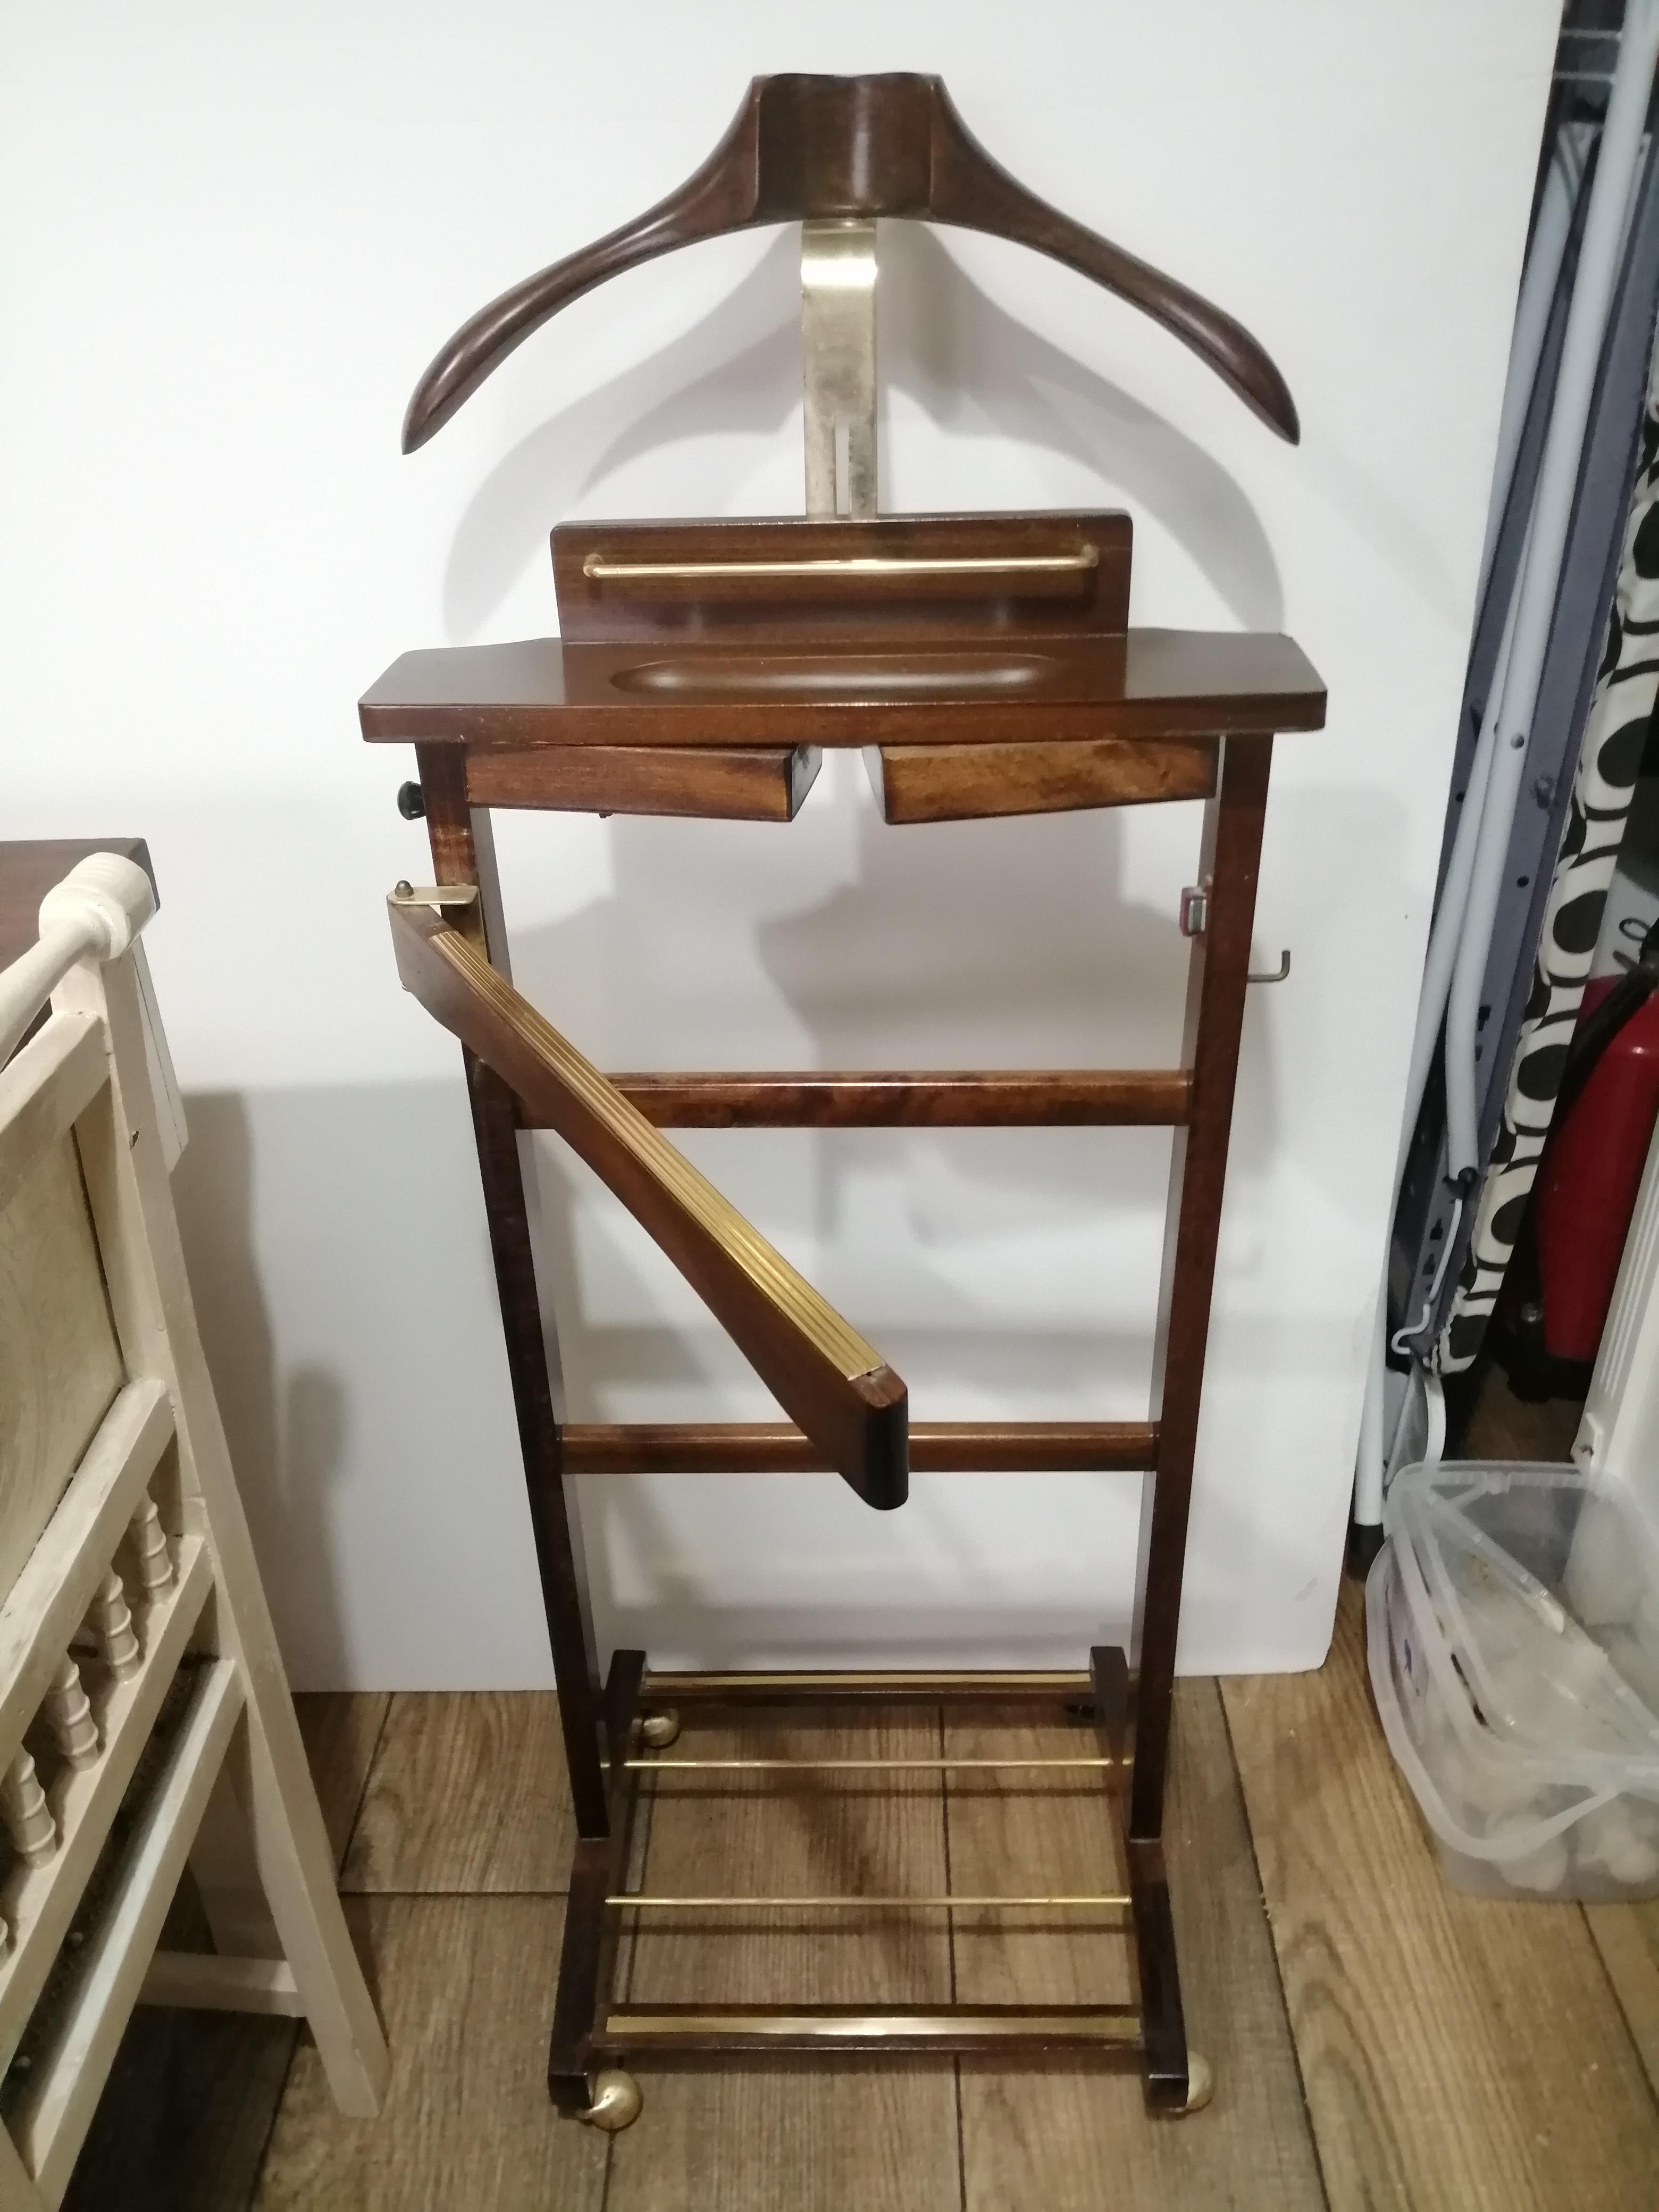 A 20th century Italian valet of wood brown color and brass, with drawers to introduce the twins or jewelry and bar to hang the pants

At the bottom it has a bar to put the shoes and on the sides a brush and a shoehorn

The jacket holder is